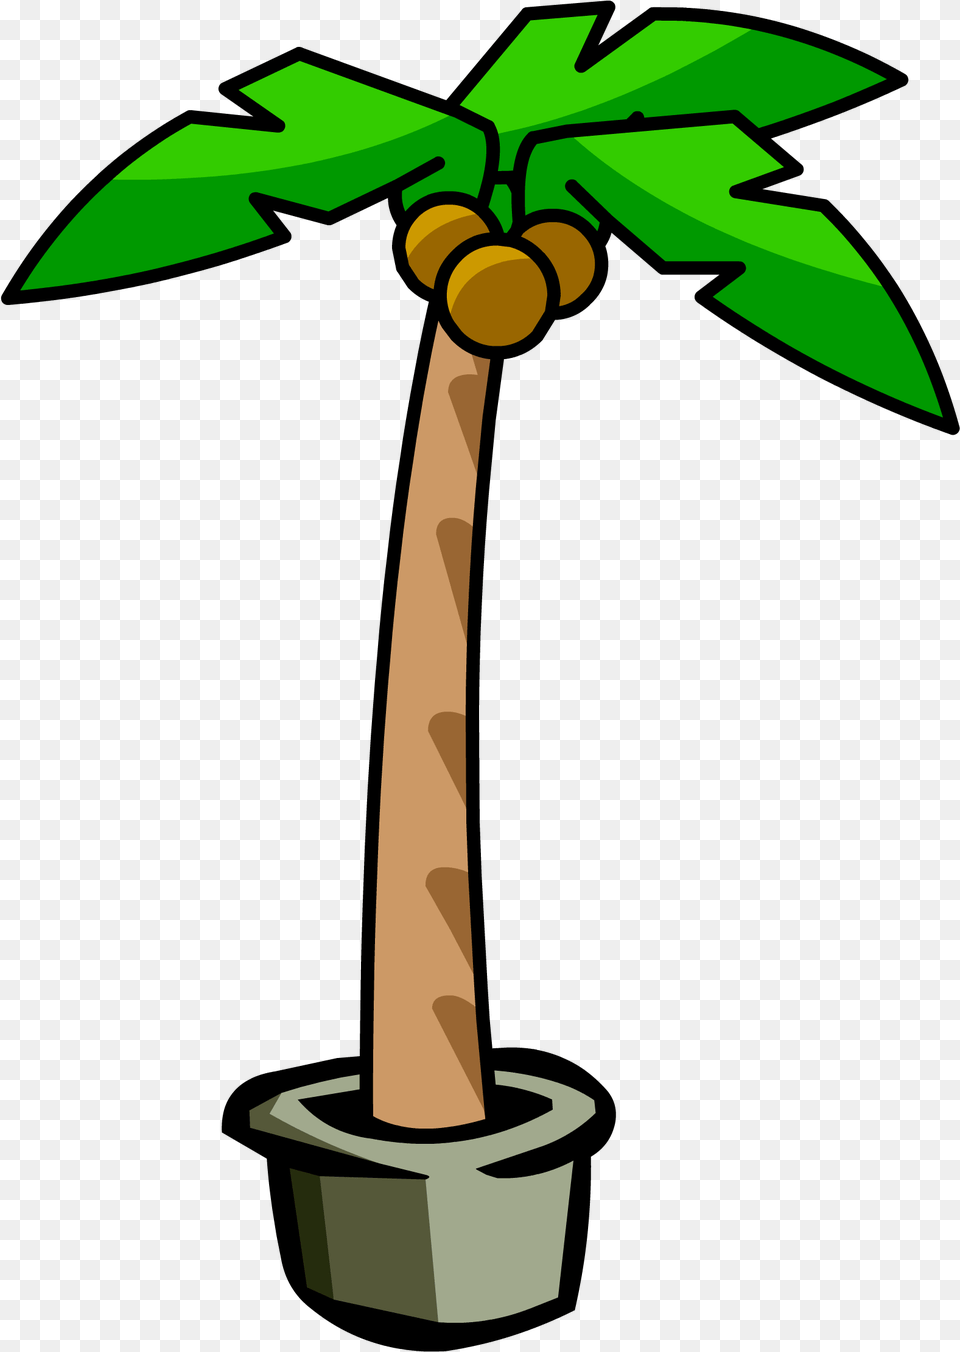 Palm Treepng Club Penguin Wiki Fandom Powered Club Penguin Palm Tree, Palm Tree, Plant, Leaf, Cross Free Png Download